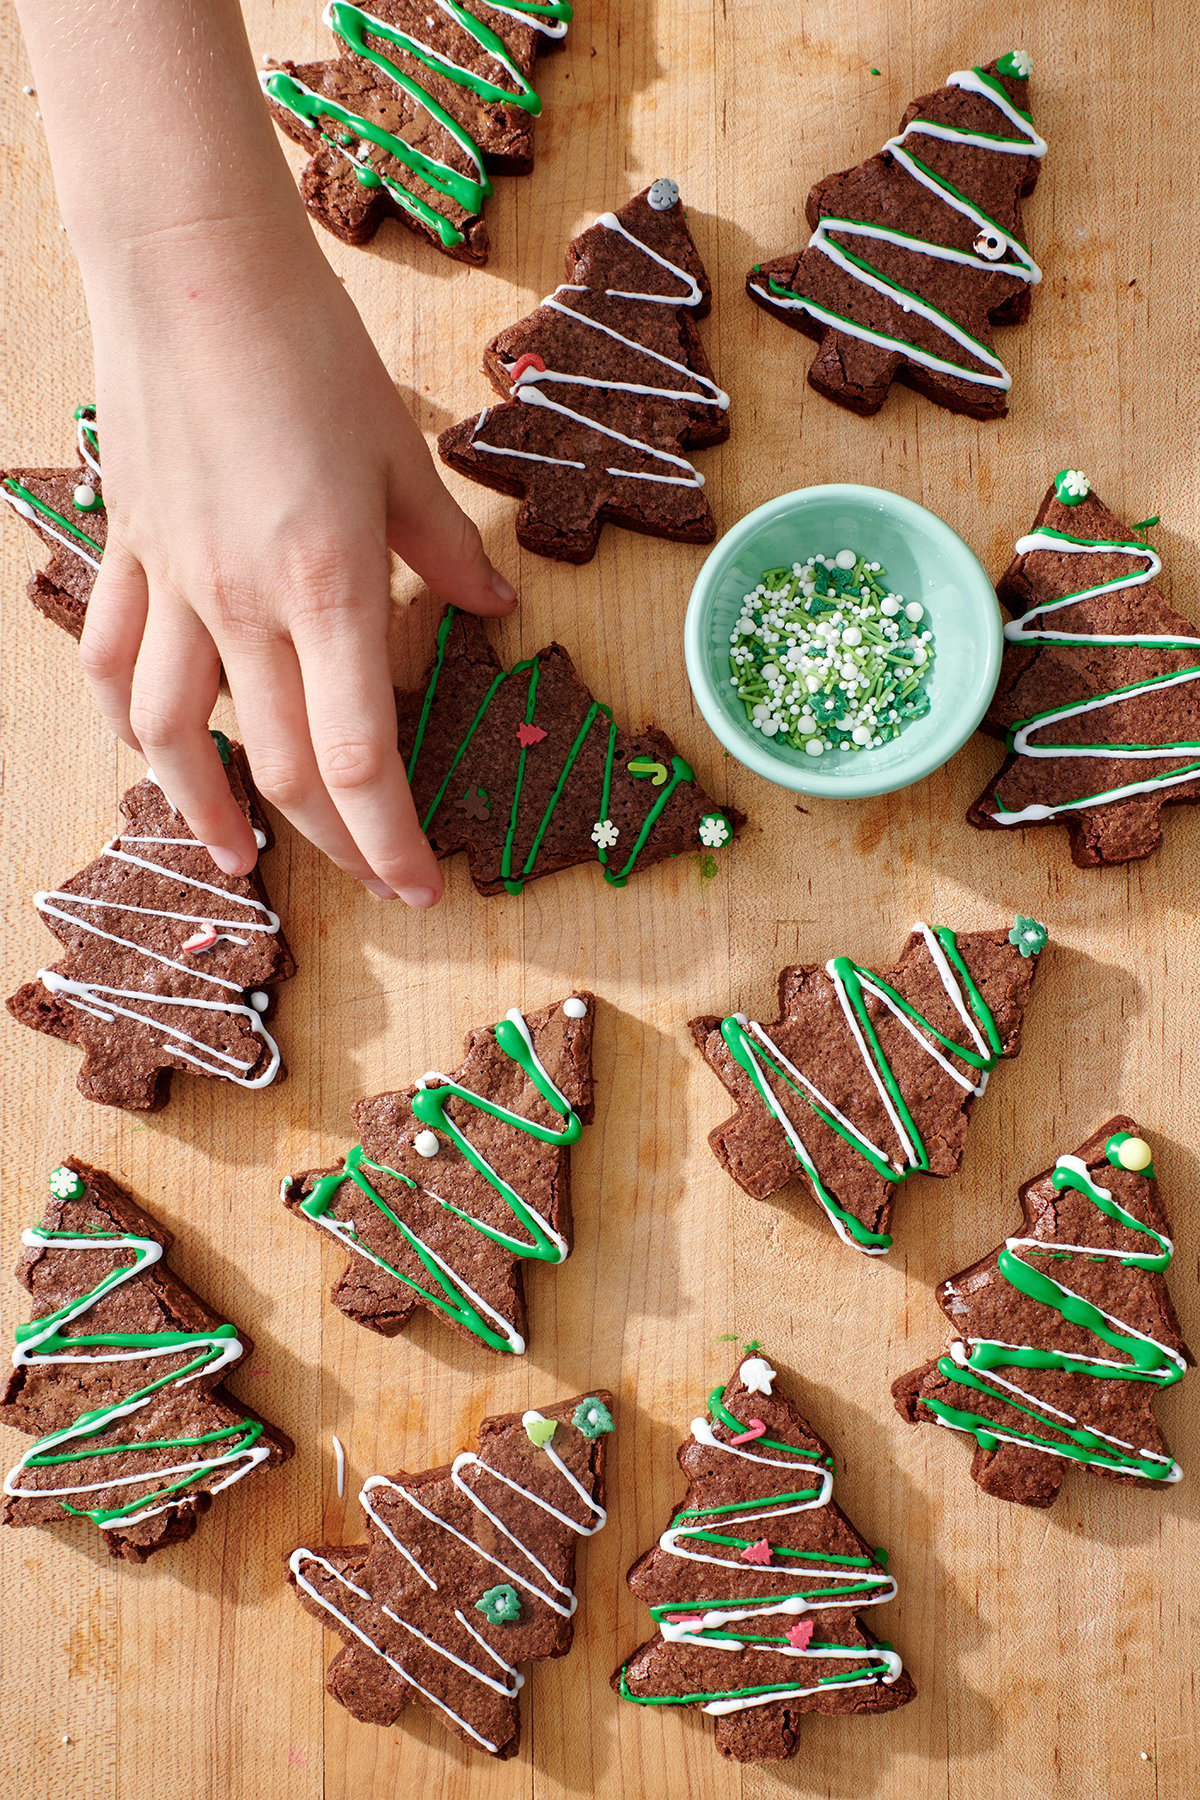 Child's hand grabbing Christmas tree brownie off of serving board.